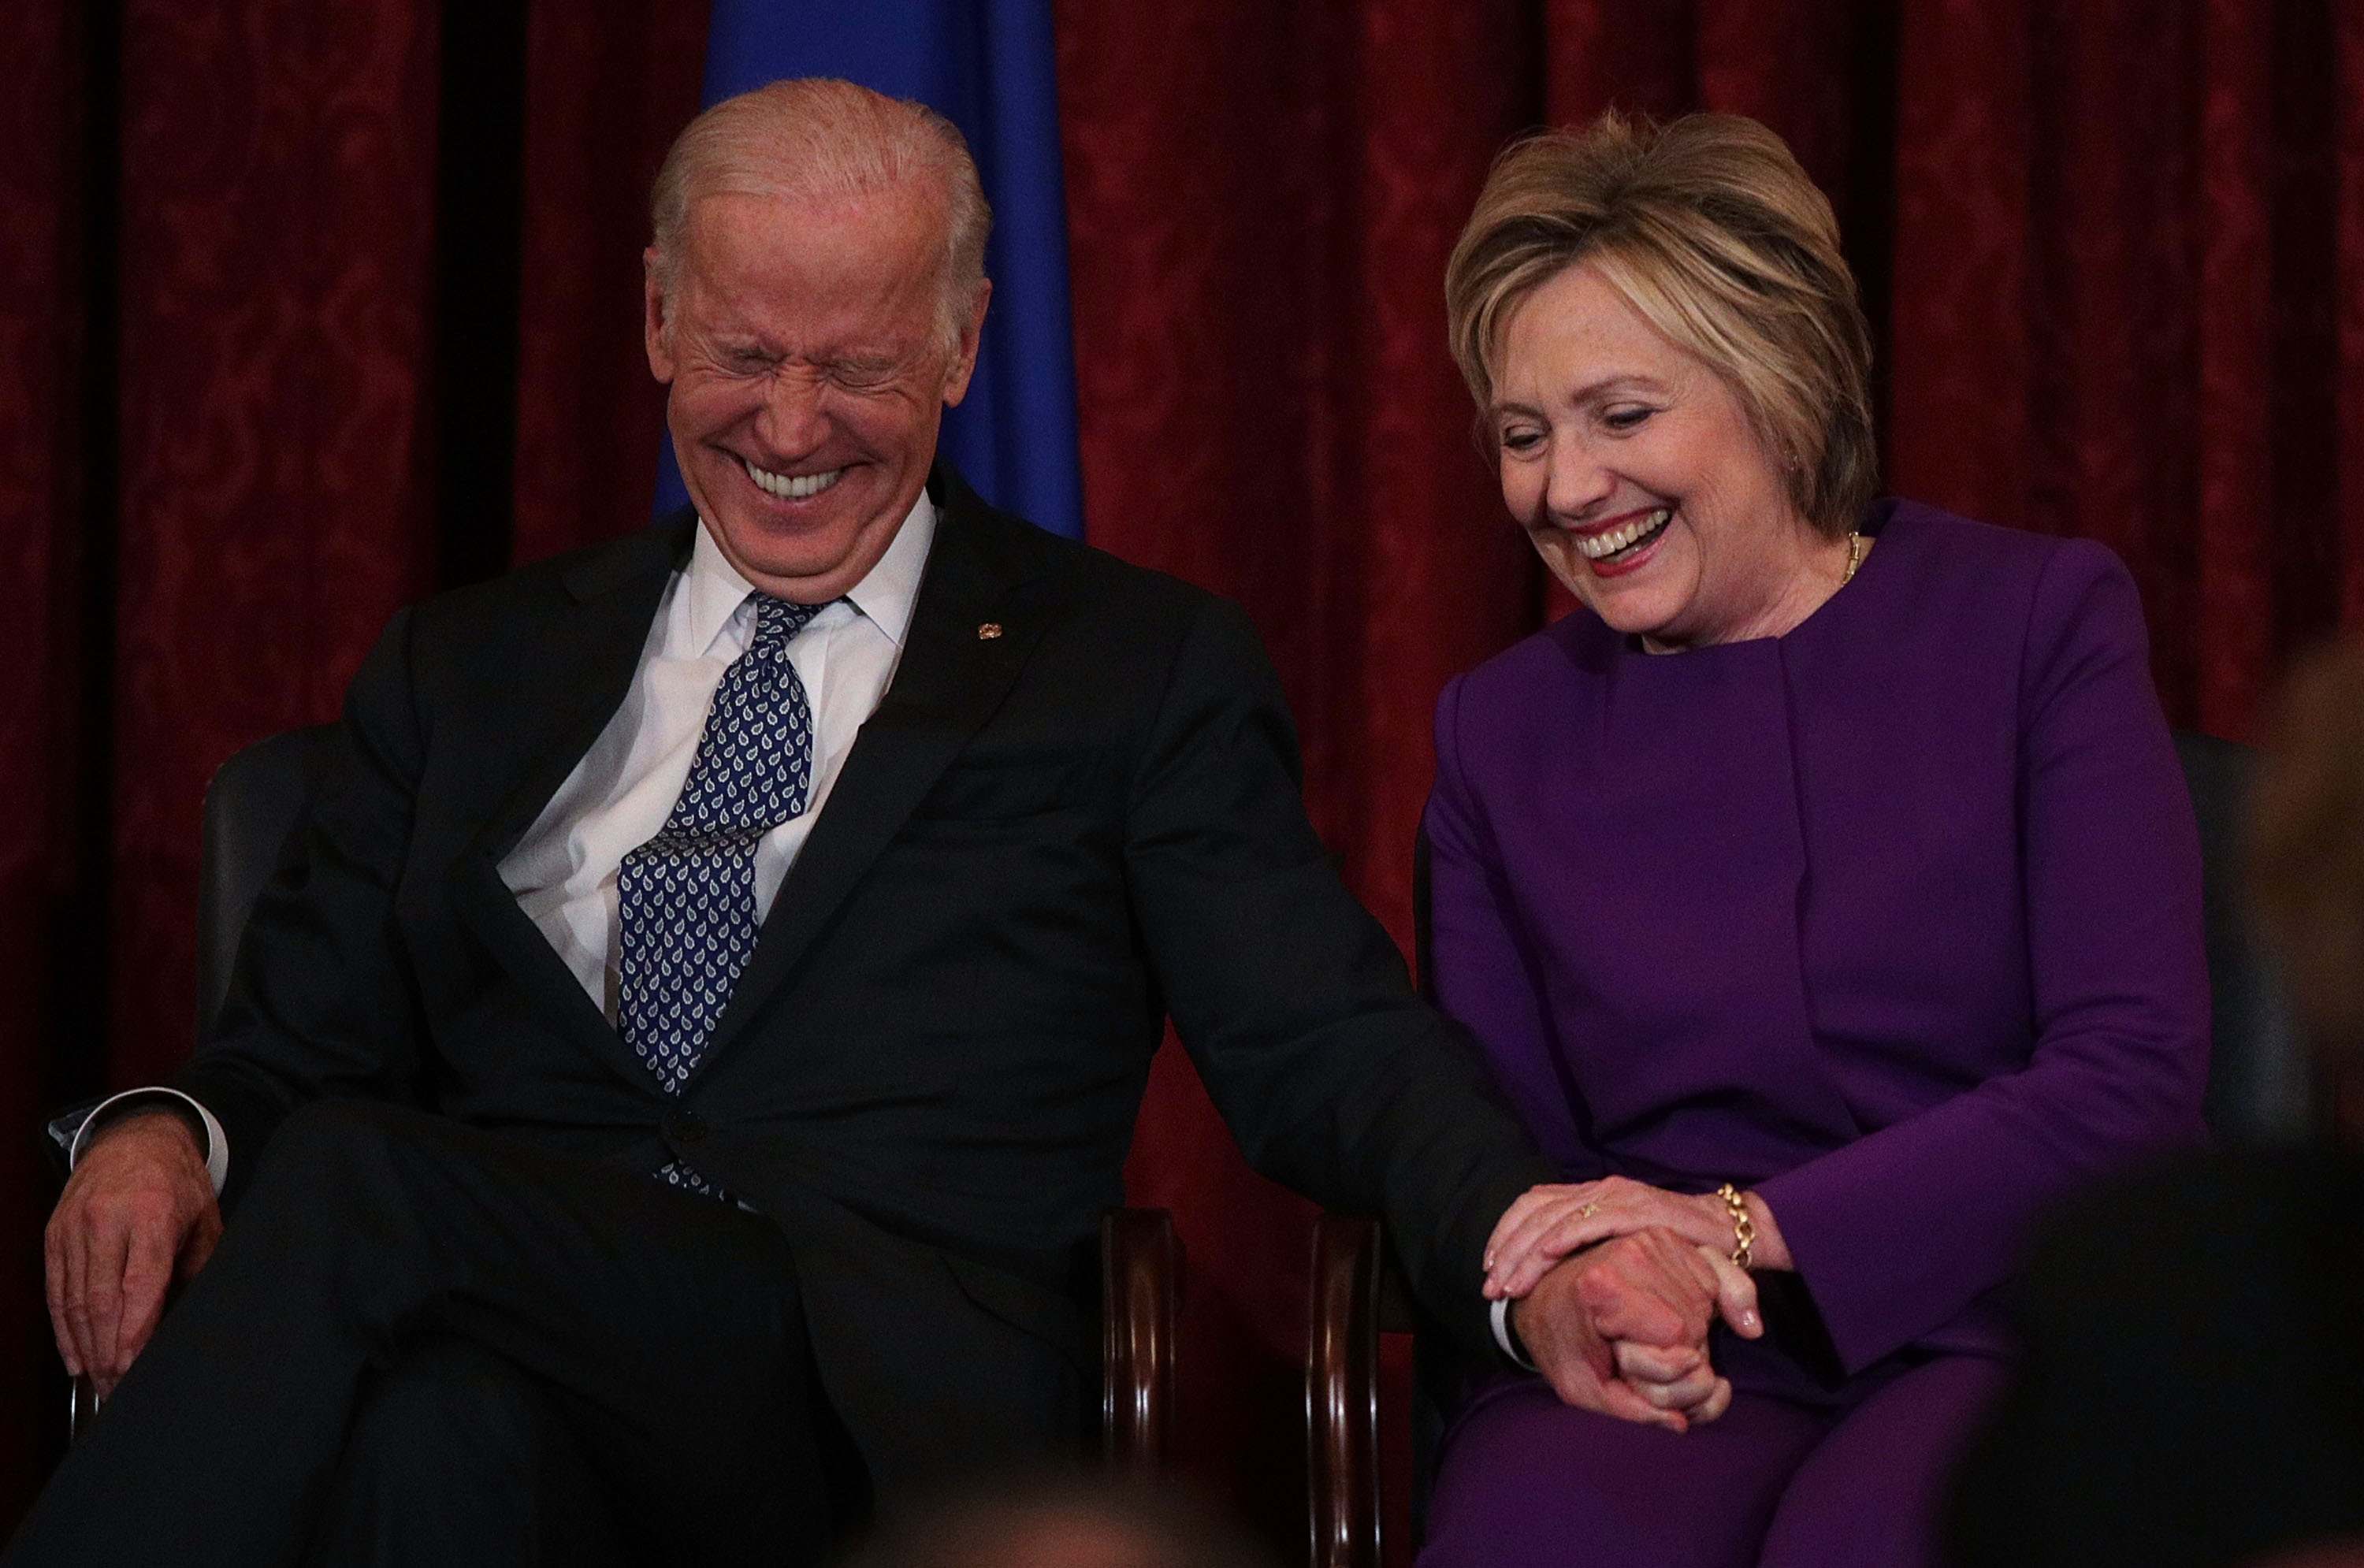 Former U.S. Secretary of State Hillary Clinton (R) shares a moment with Vice President Joseph Biden (L) during a leadership portrait unveiling ceremony for Senate Minority Leader Sen. Harry Reid (D-NV) December 8, 2016 on Capitol Hill in Washington, DC.   (Alex Wong--Getty Images) (Alex Wong—Getty Images)